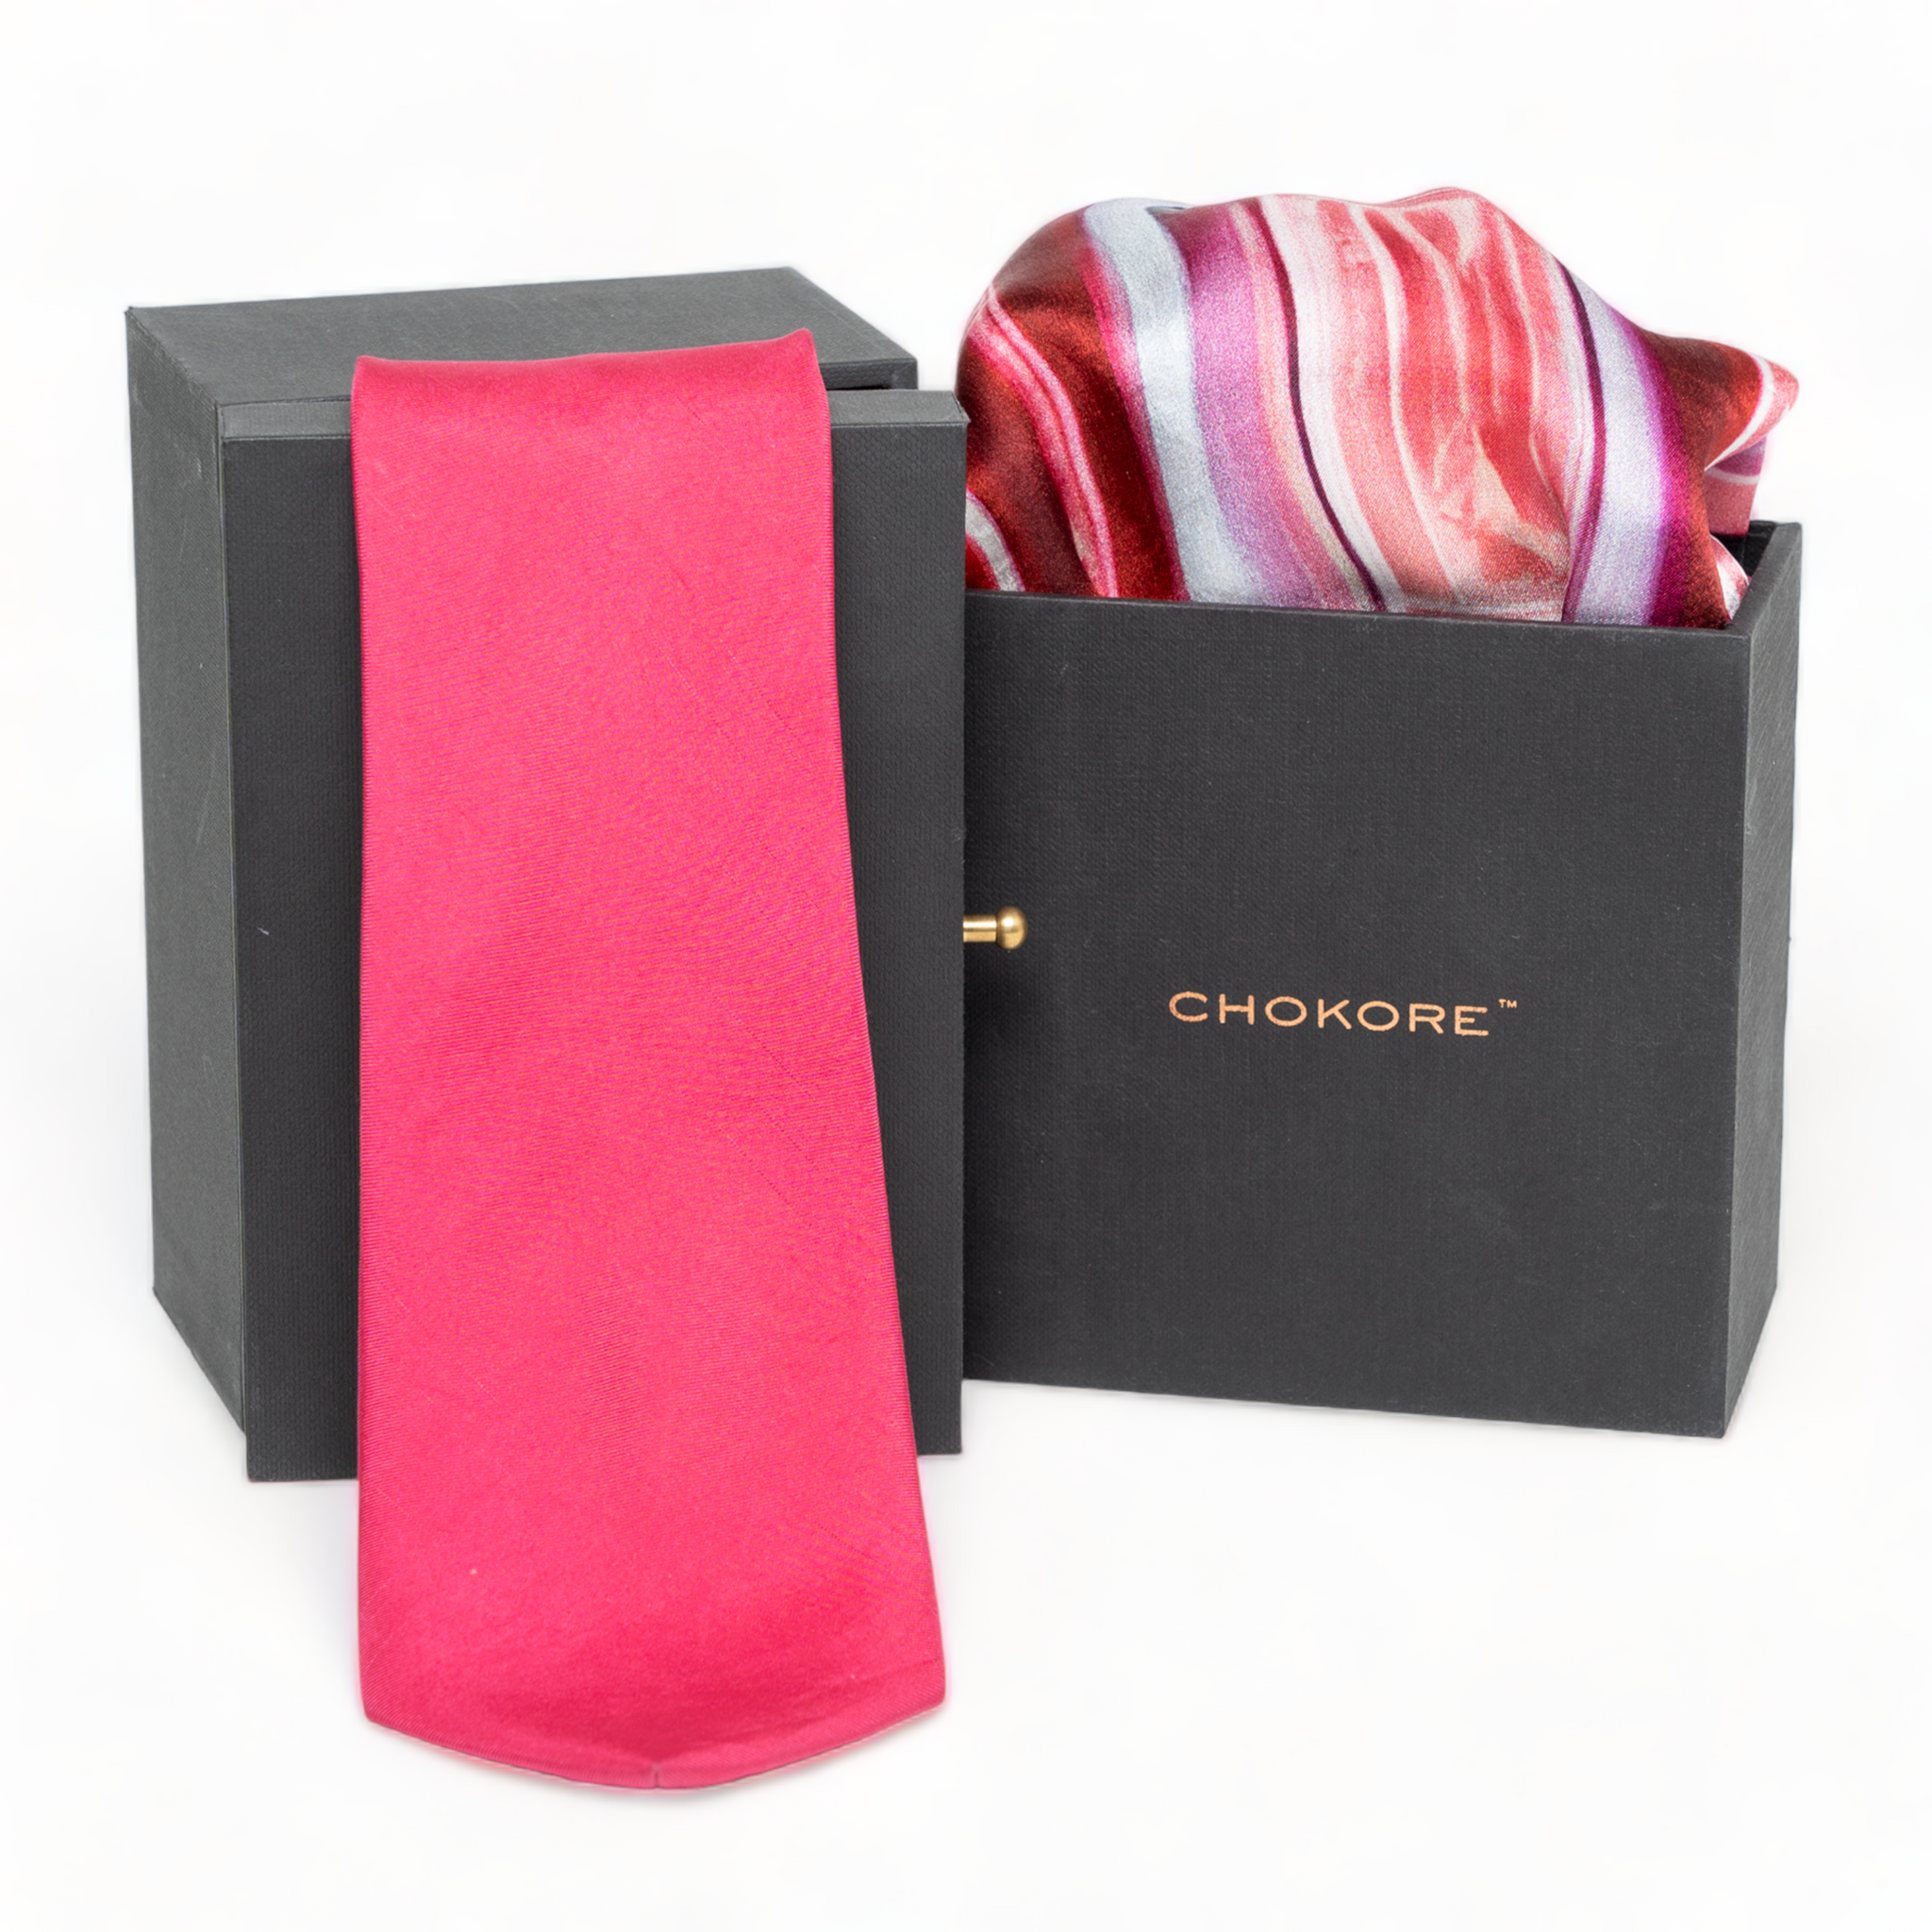 Chokore Special 2-in-1 Gift Set for Him (Solid Pink Necktie & Jaipur Pocket Square)